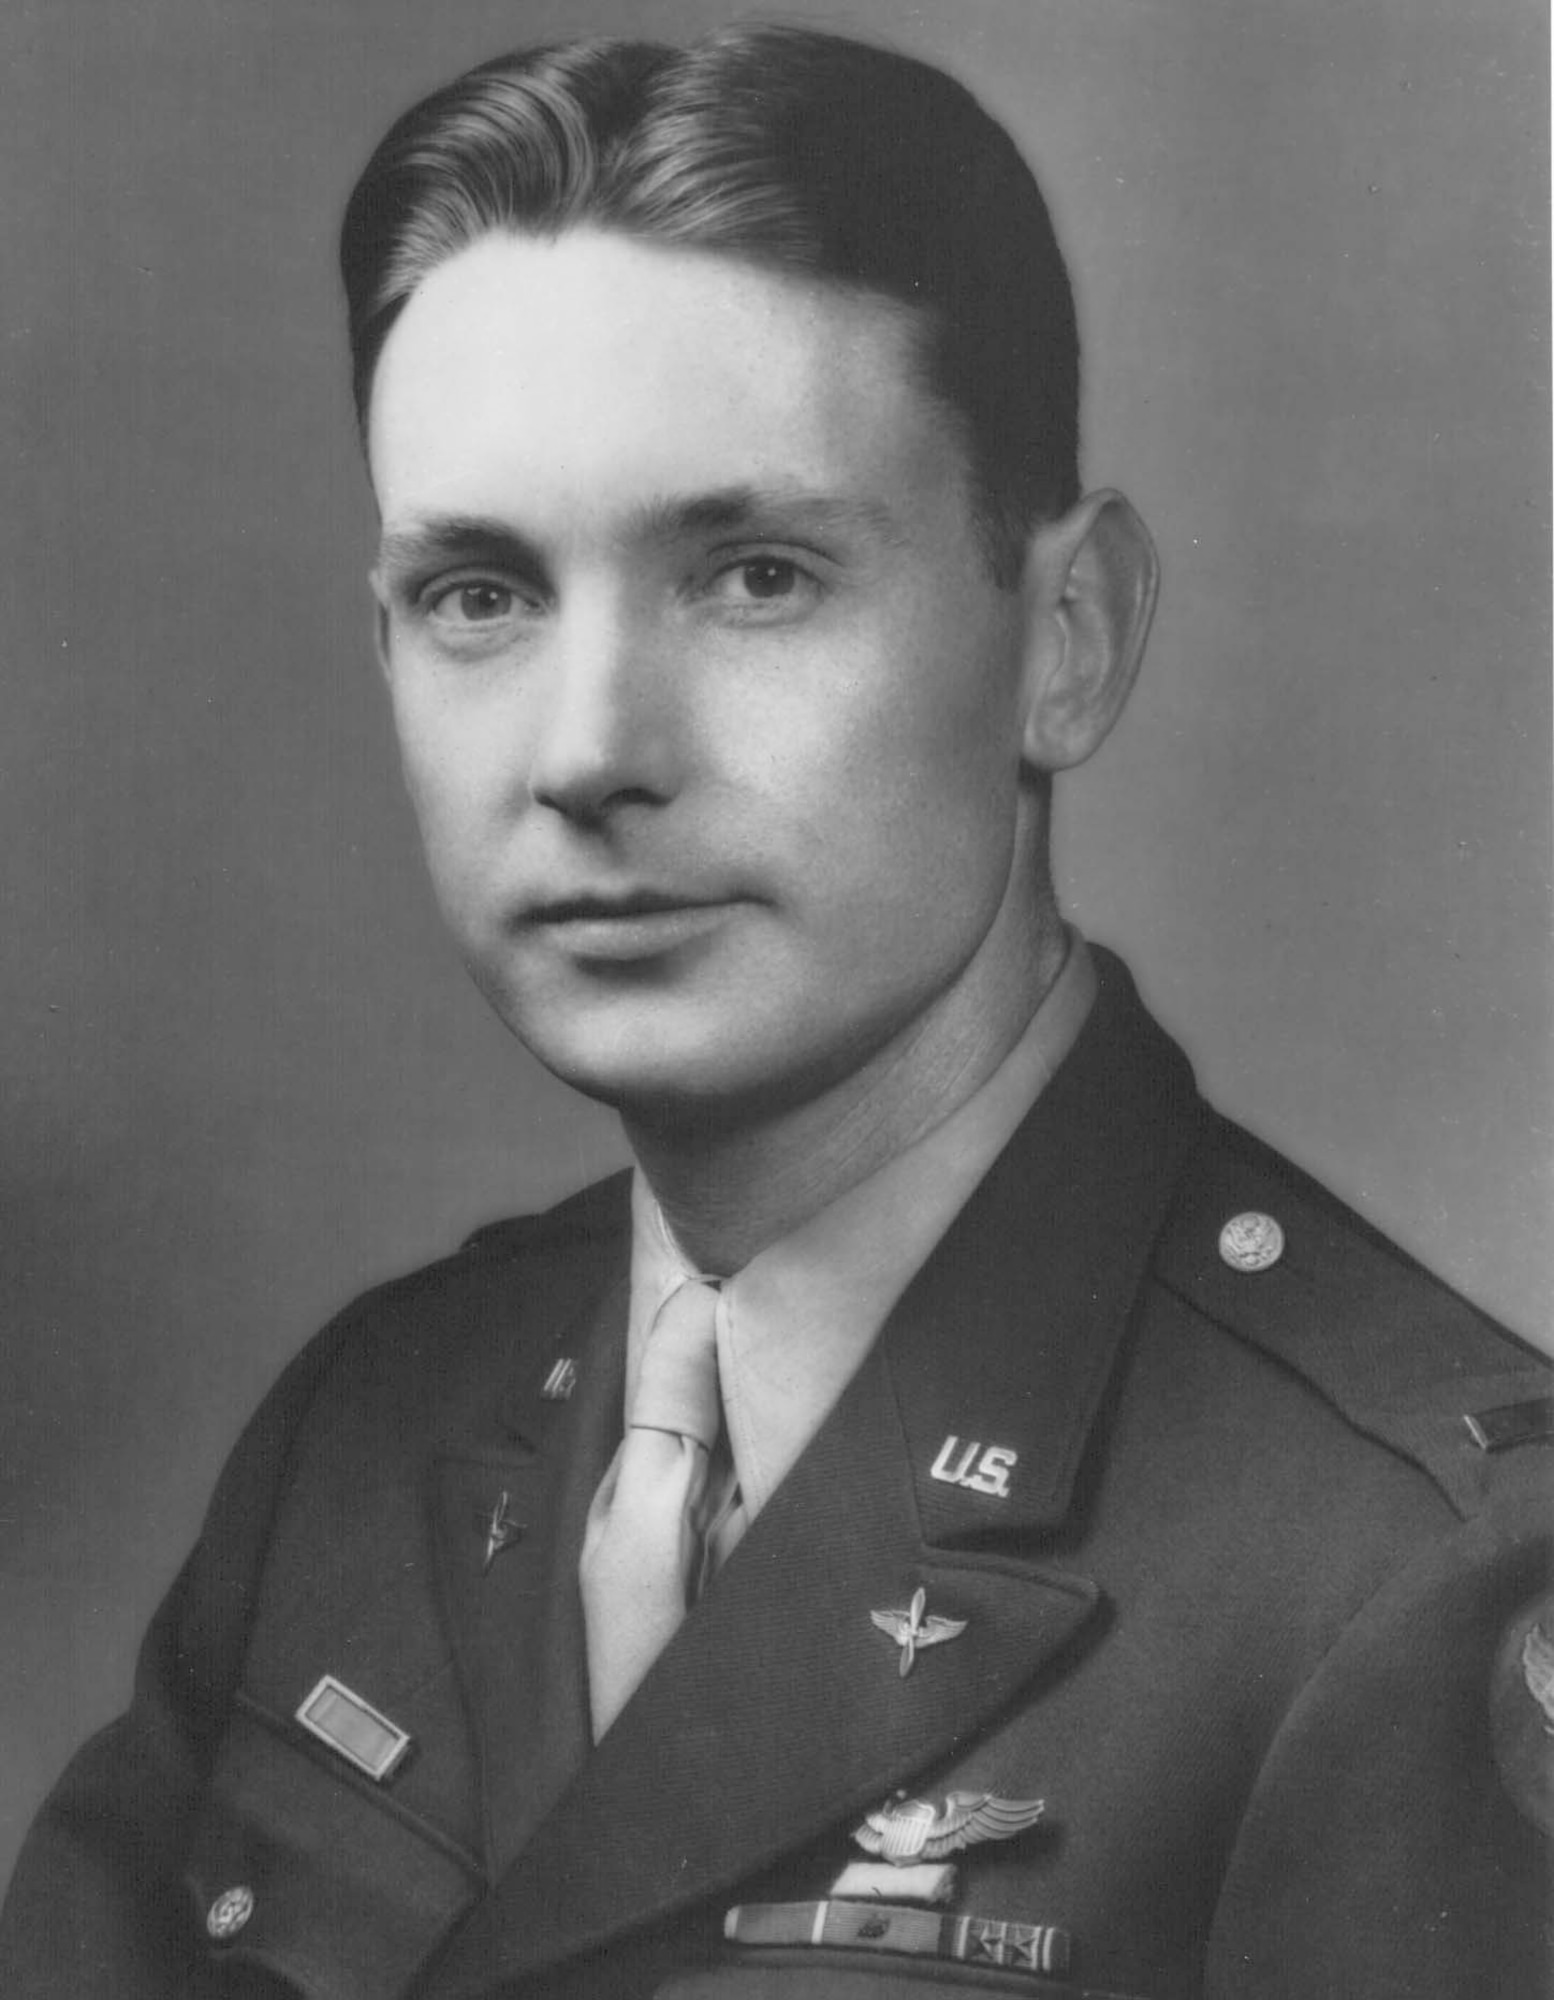 Medal of Honor recipient WWII